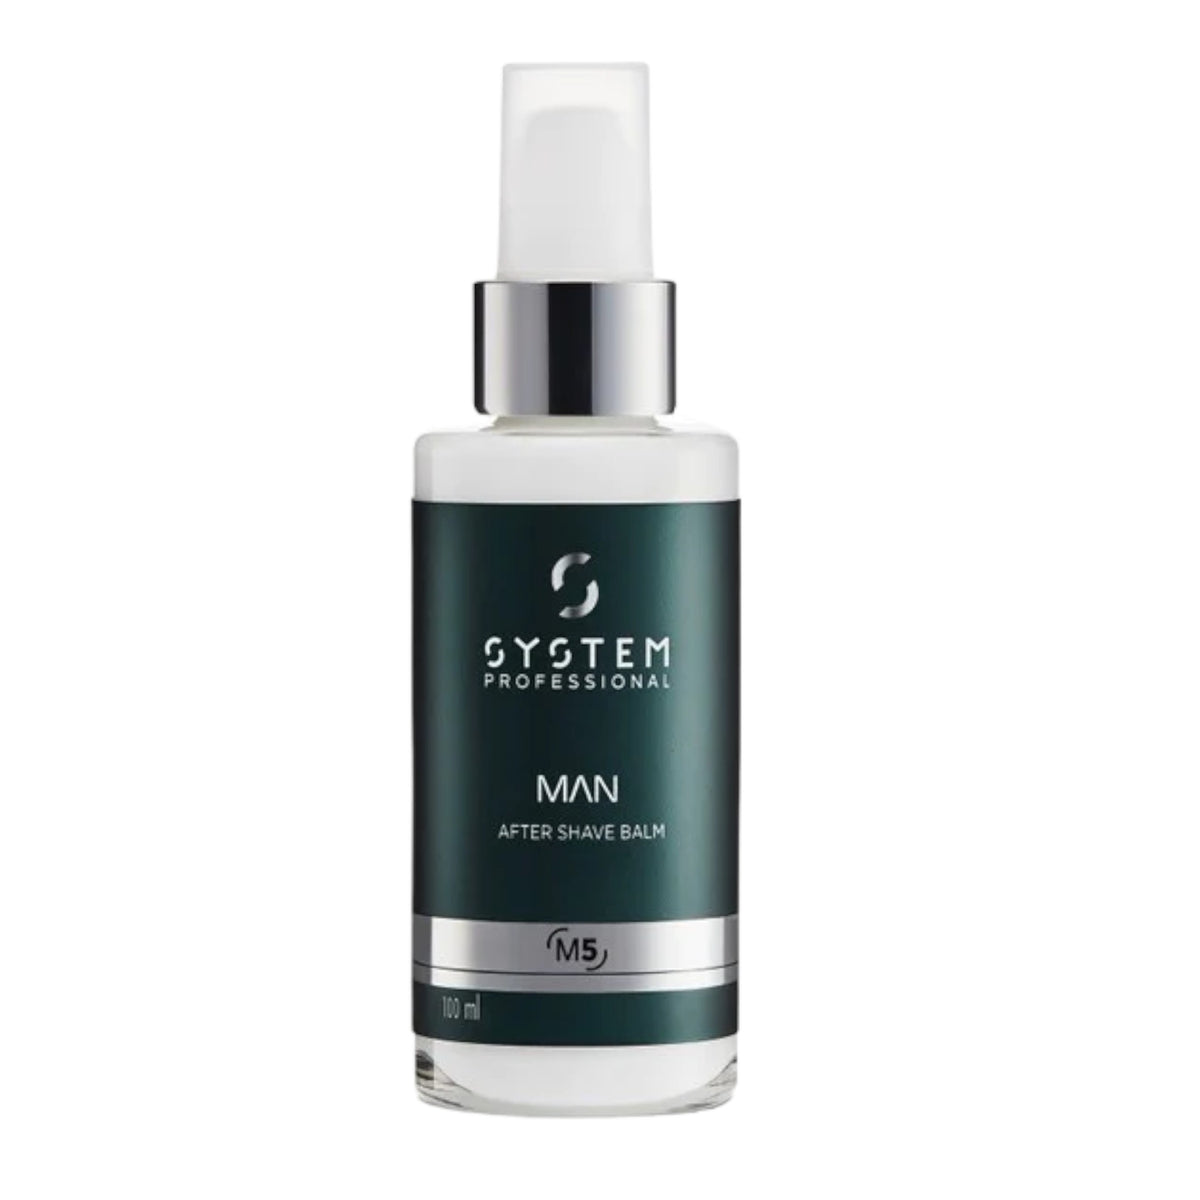 System Professional Man After Shave Balm 100ml (M5)